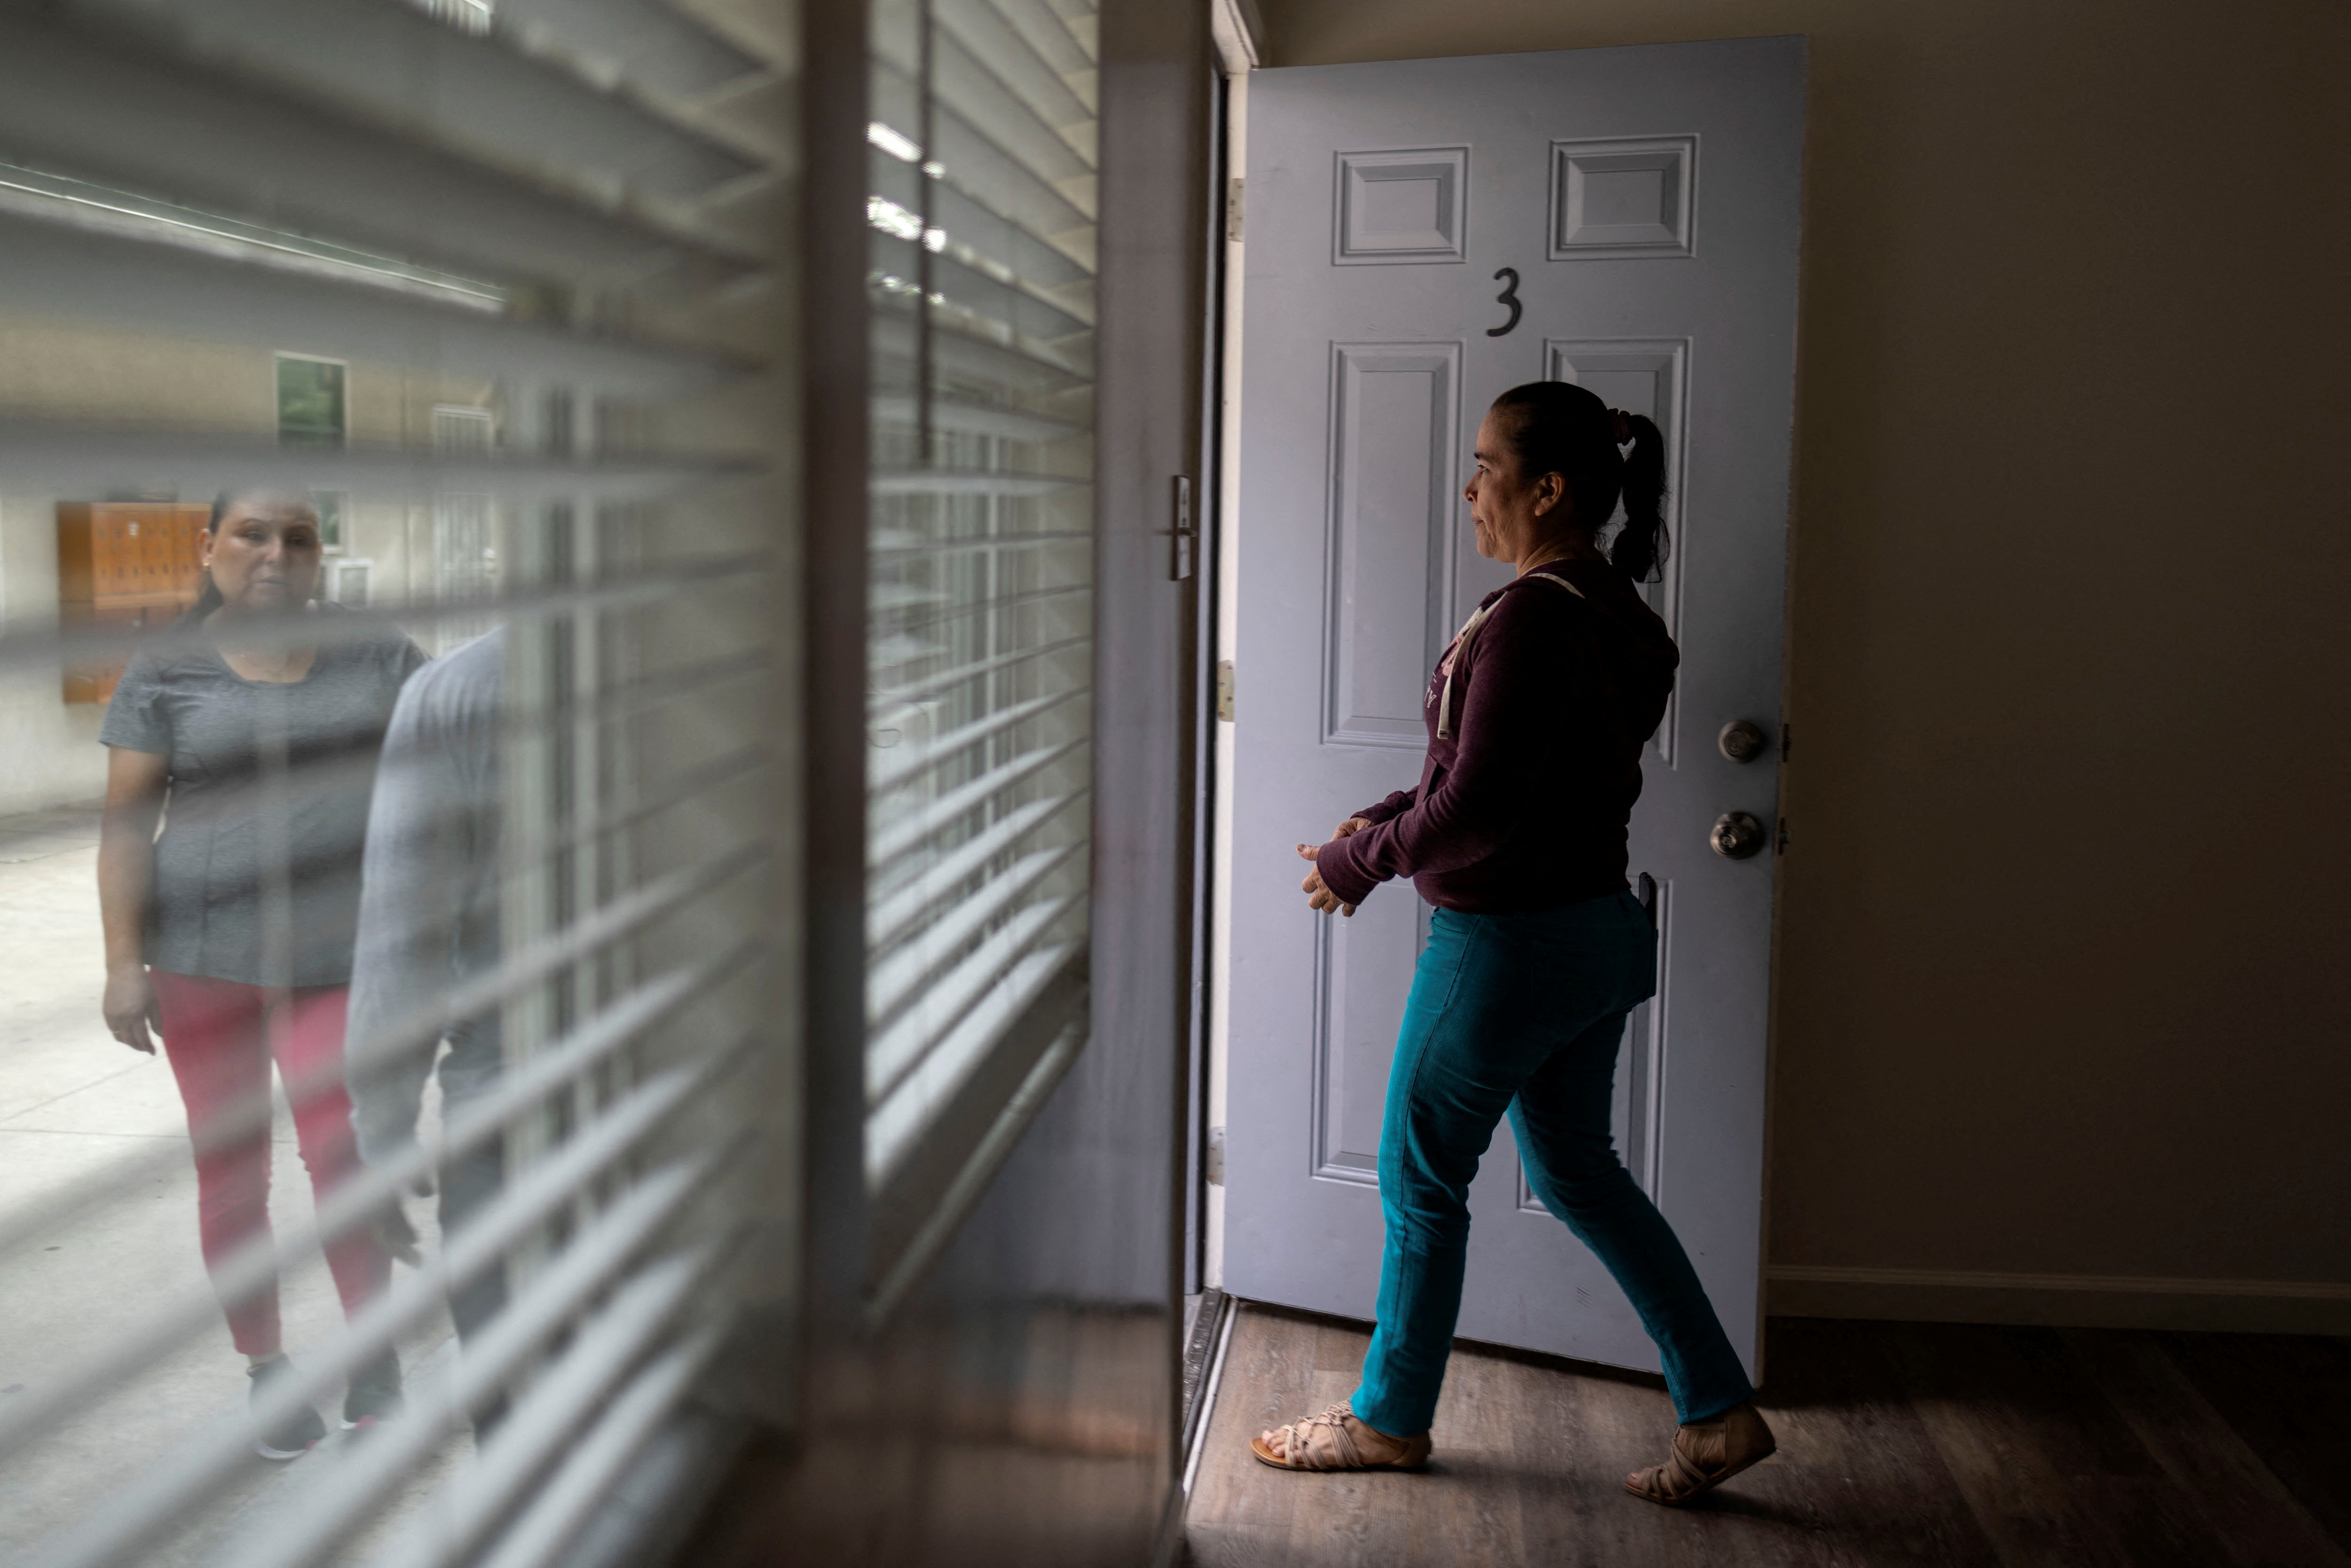 Maria Hernandez visits a potential apartment to rent, after reunification with her two daughters, in Los Angeles